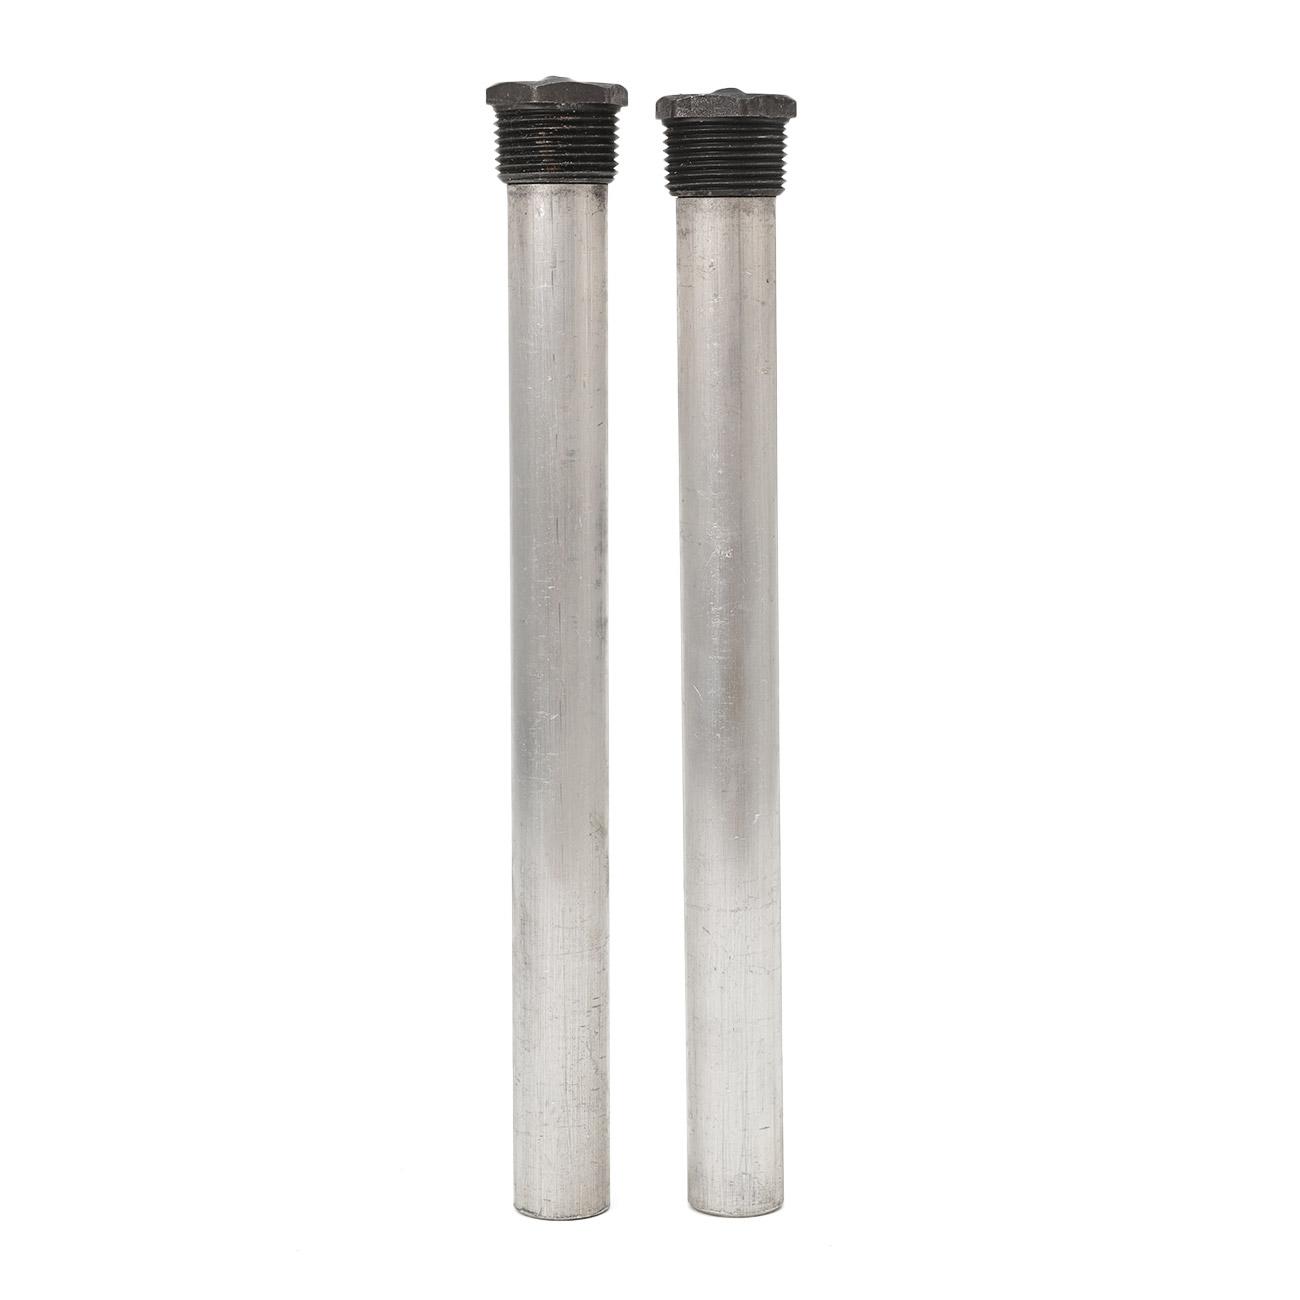 2x 9.25" Hot Water Heater Service Anode Rod For Suburban Caravan RV Dometic Hot Water Heater Anode Rod